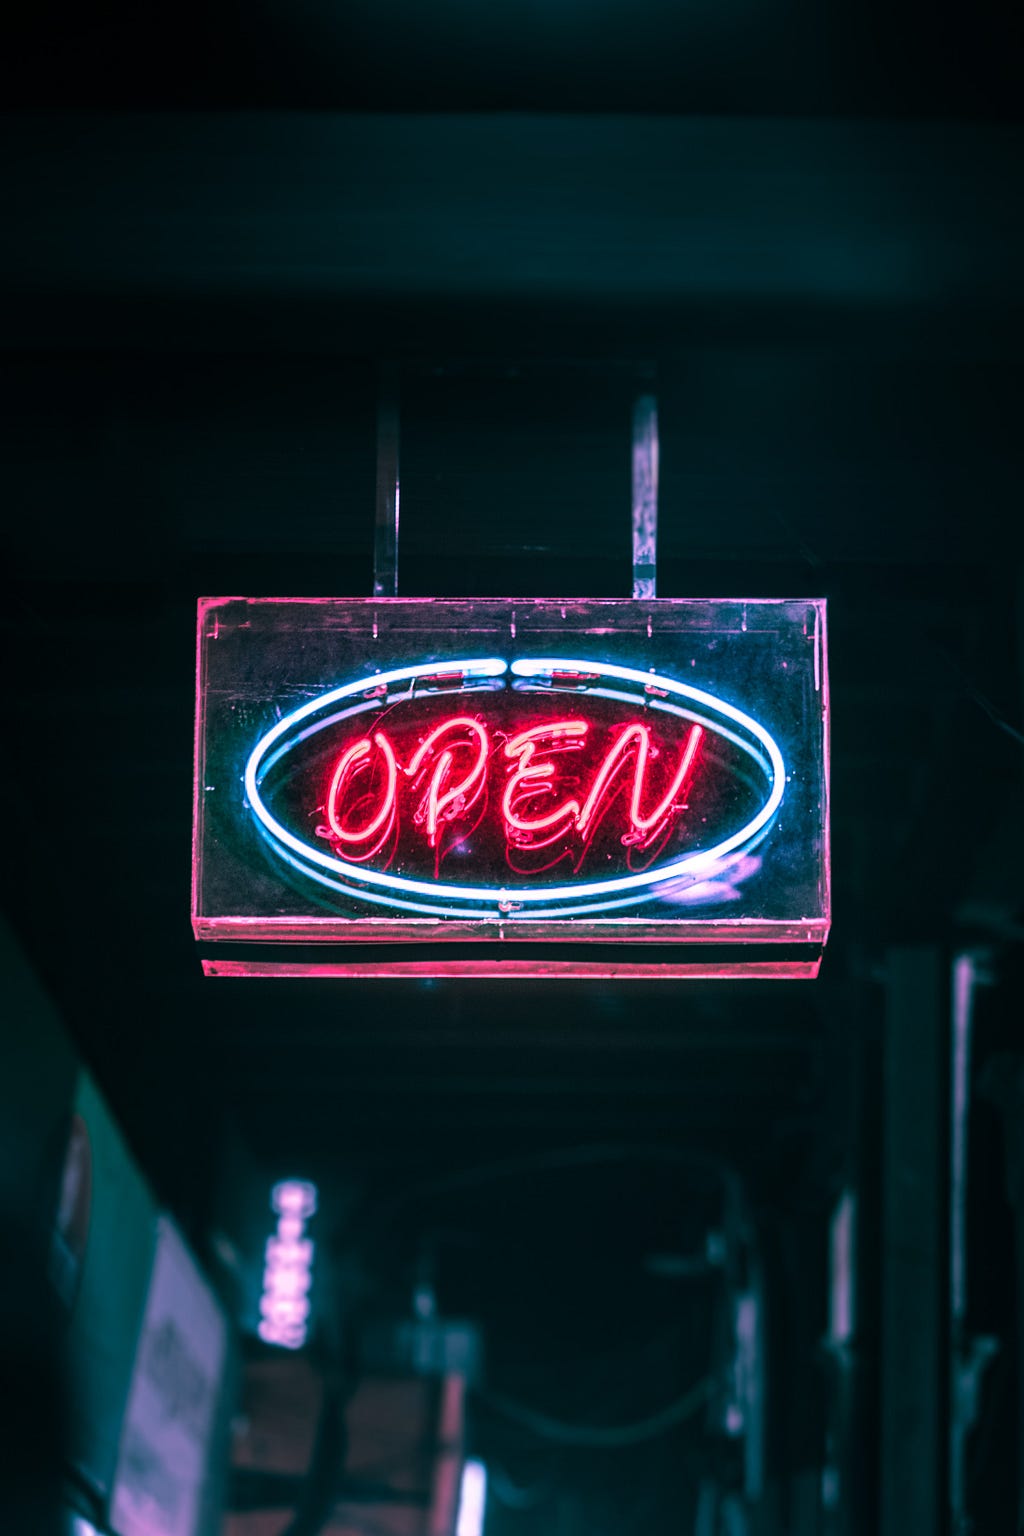 ‘Open’ sign in neon red and blue.